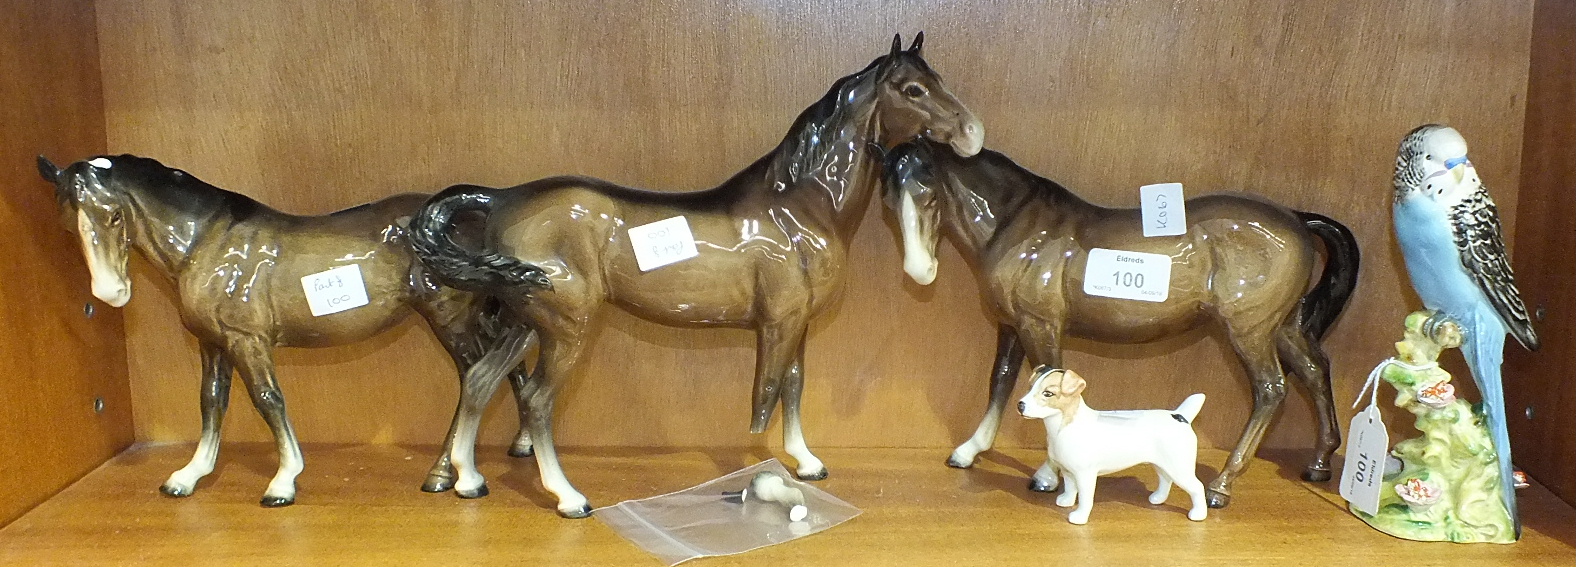 Two Beswick model horses, Mare, facing left, brown gloss (1 af), one other horse, af, a blue